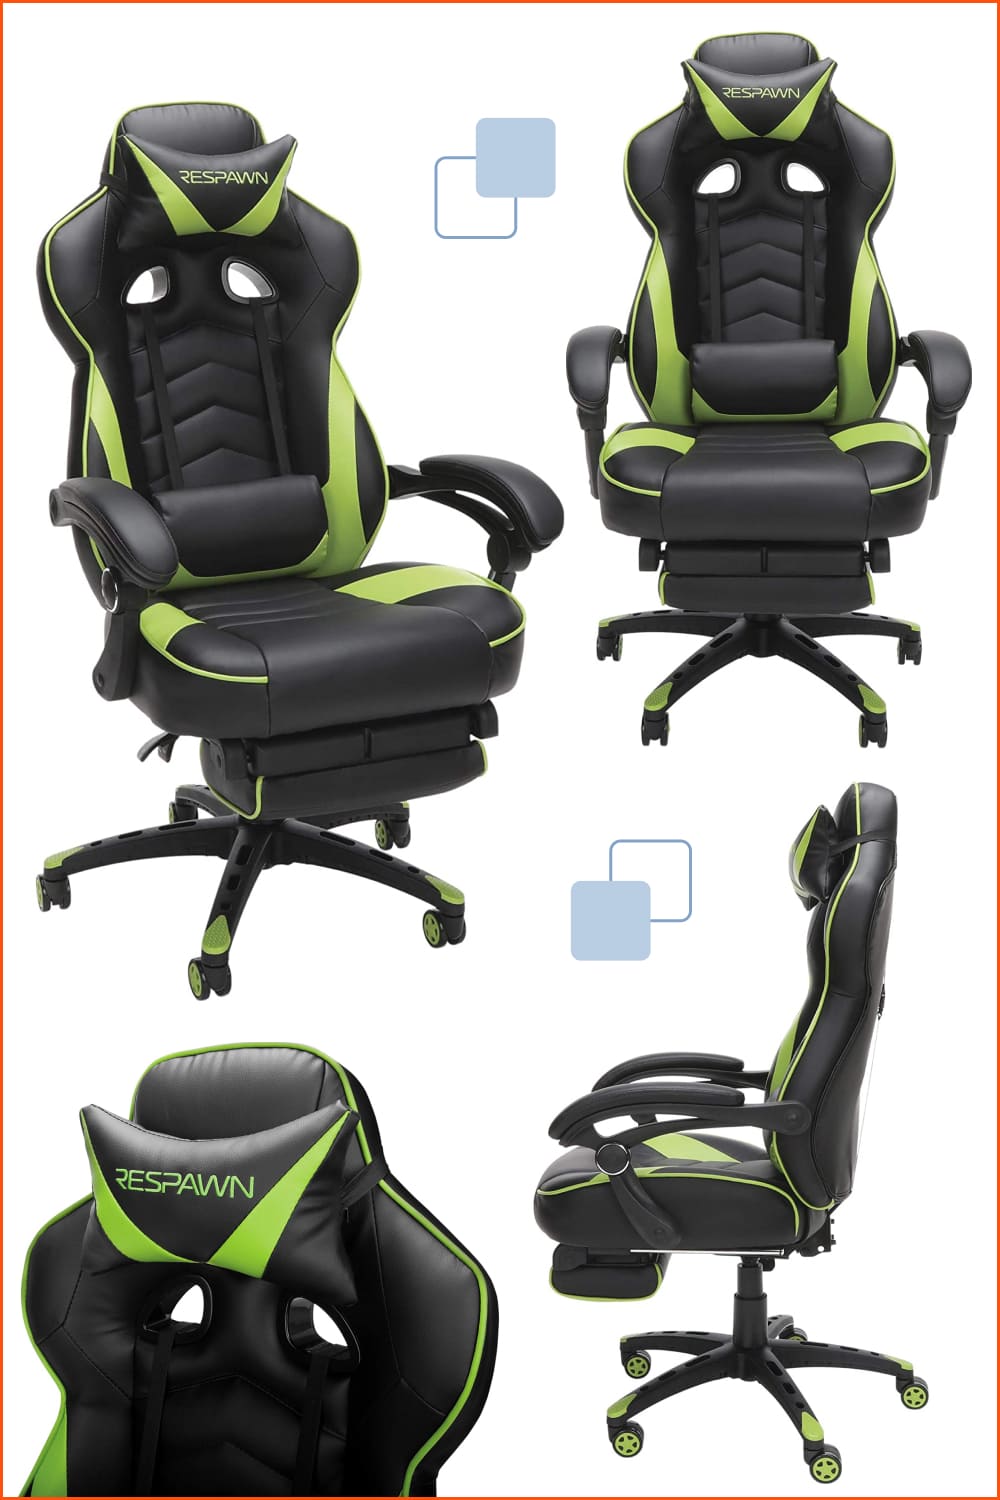 Gaming chair in black-green color.